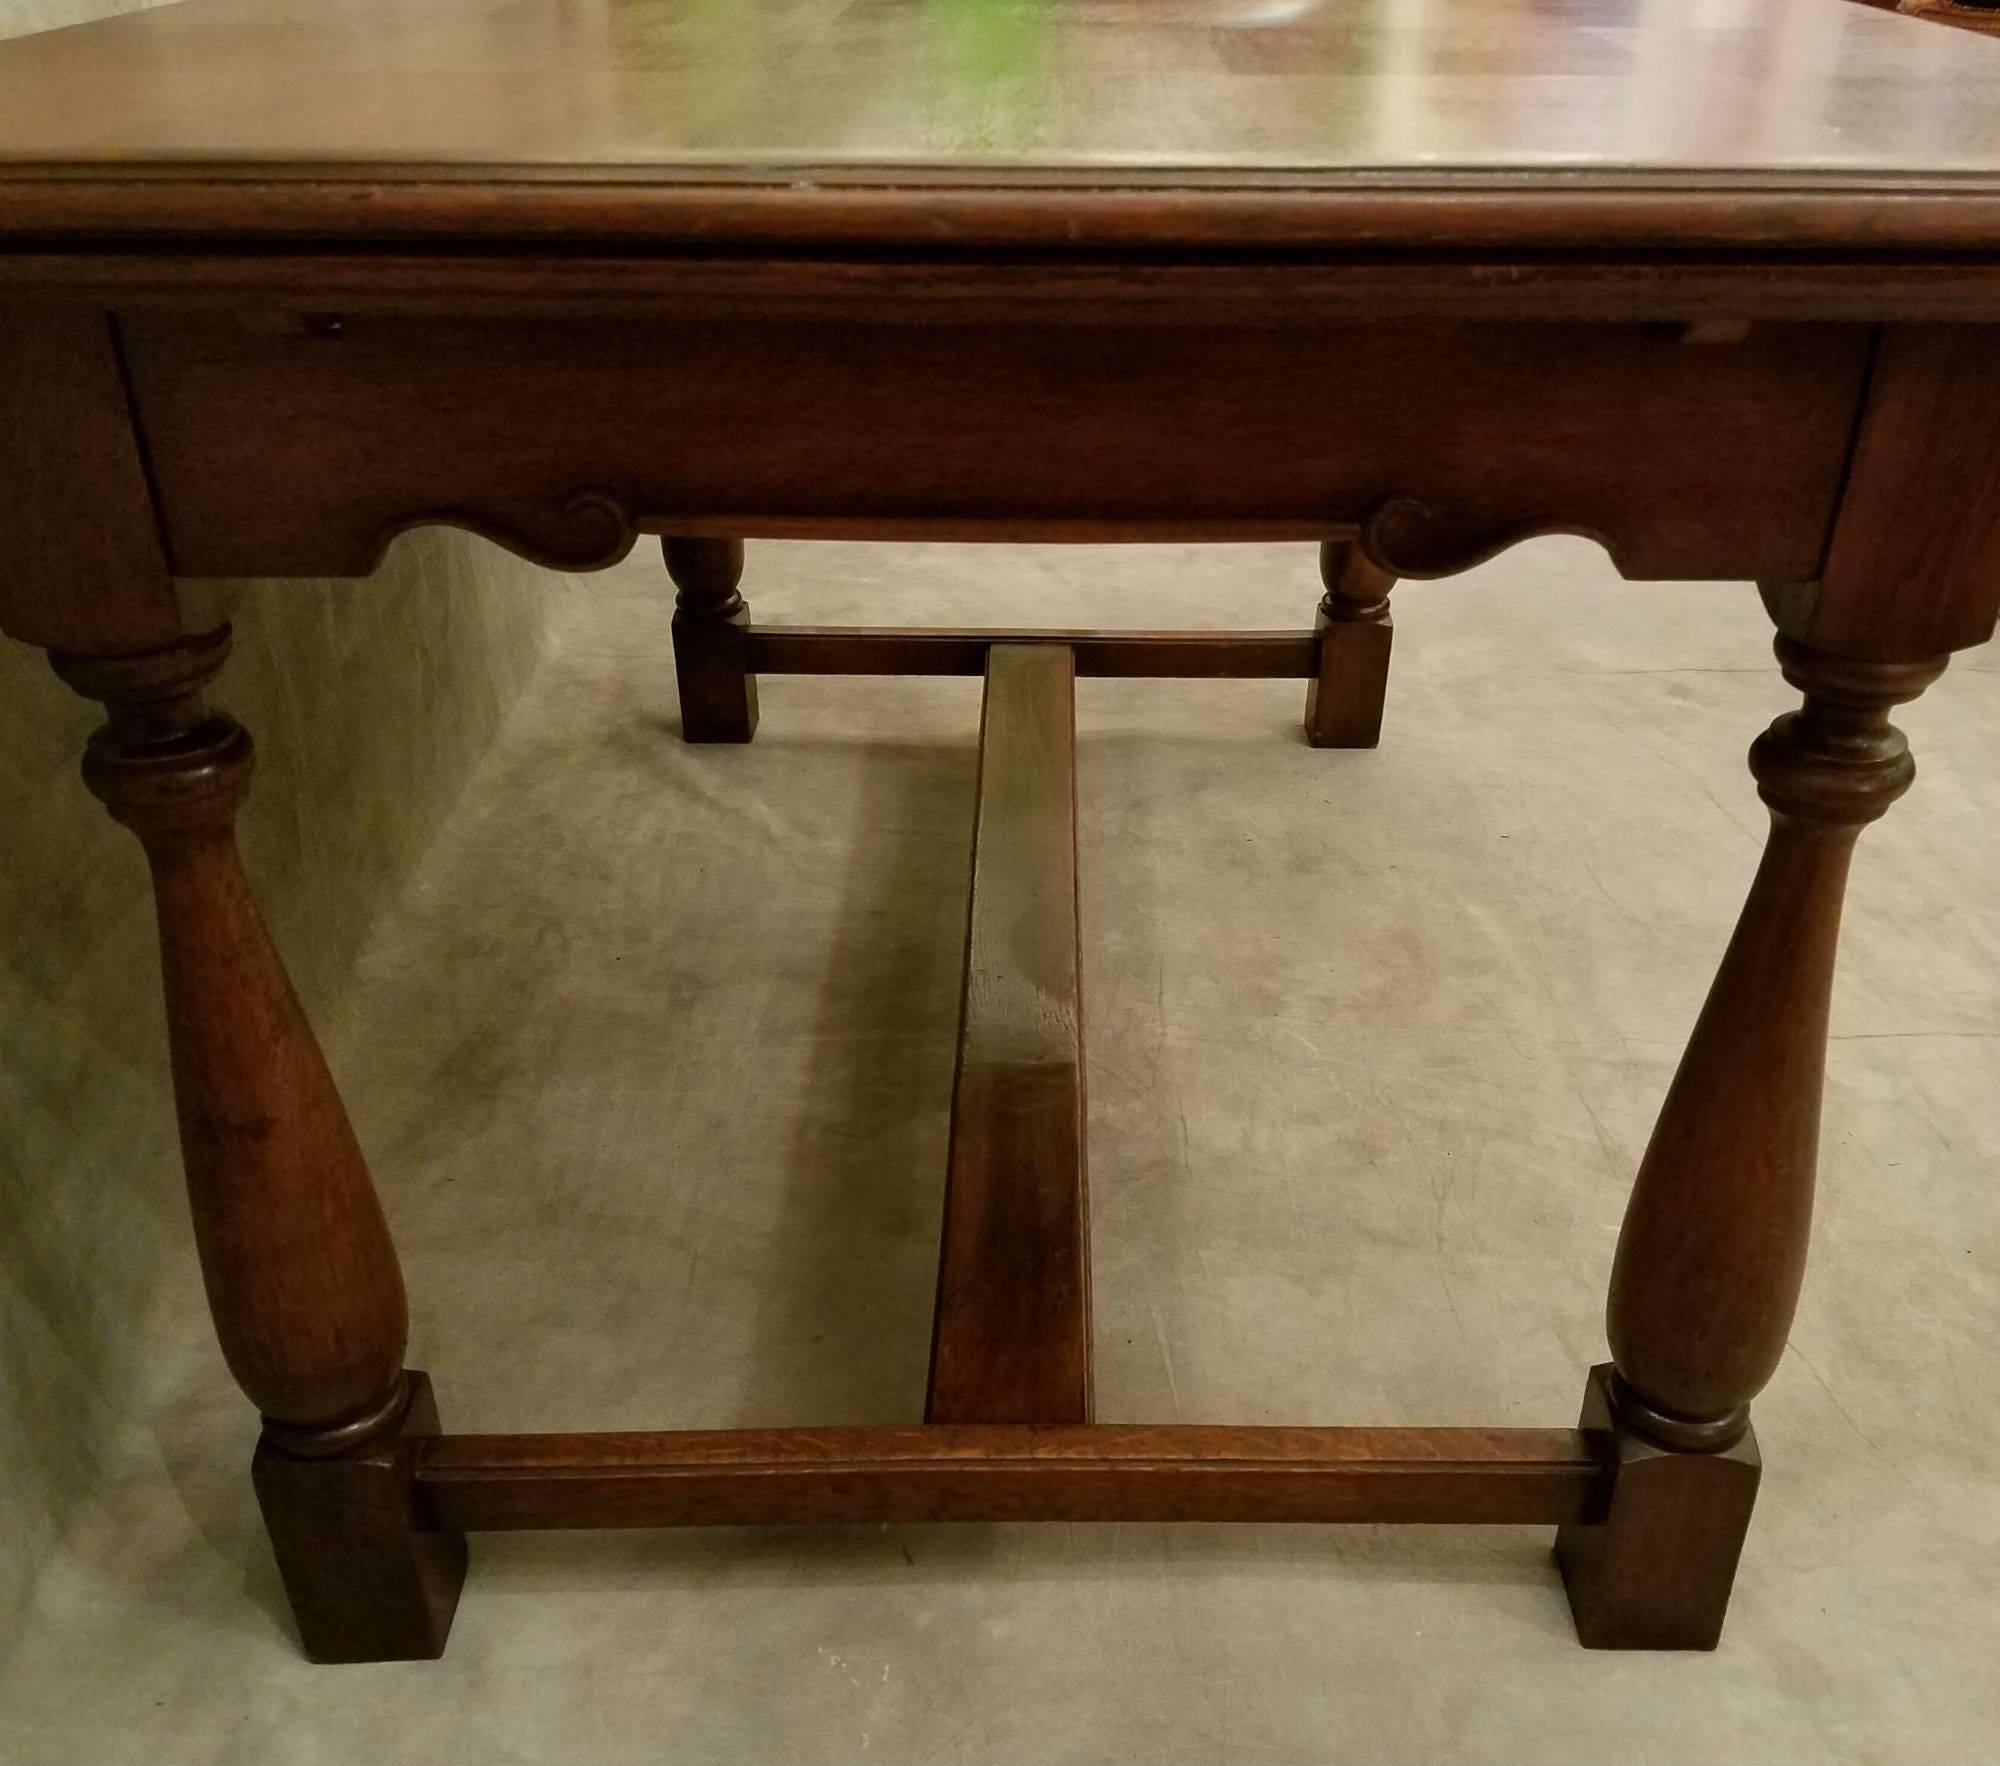 Country French carved oak refectory dining table with parquetry top. 

Measures: Height 31